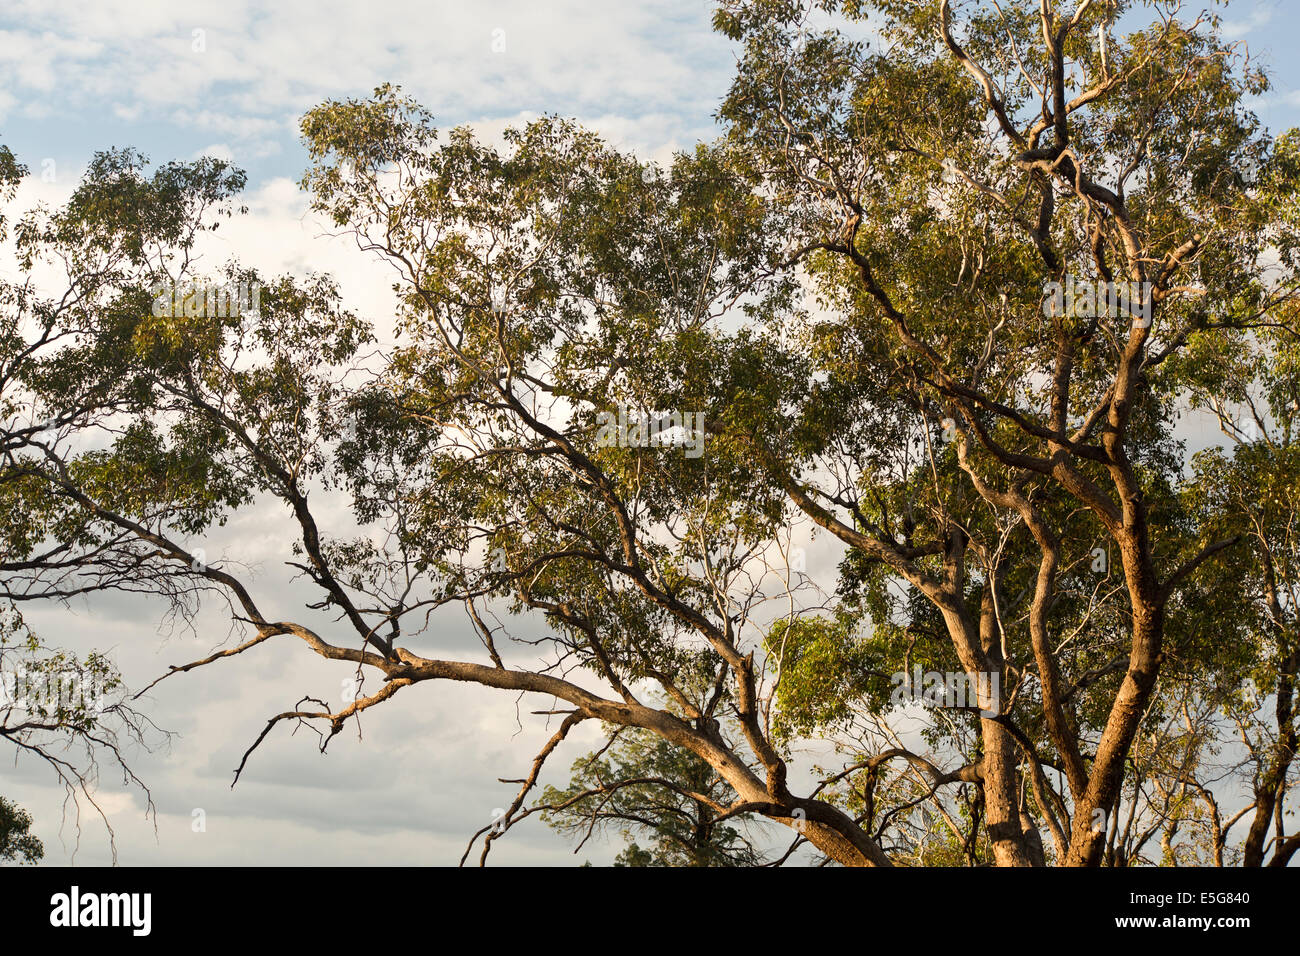 Large eucalyptus trees, also called gum trees, with a beautiful blue sky in background at sunset. Stock Photo